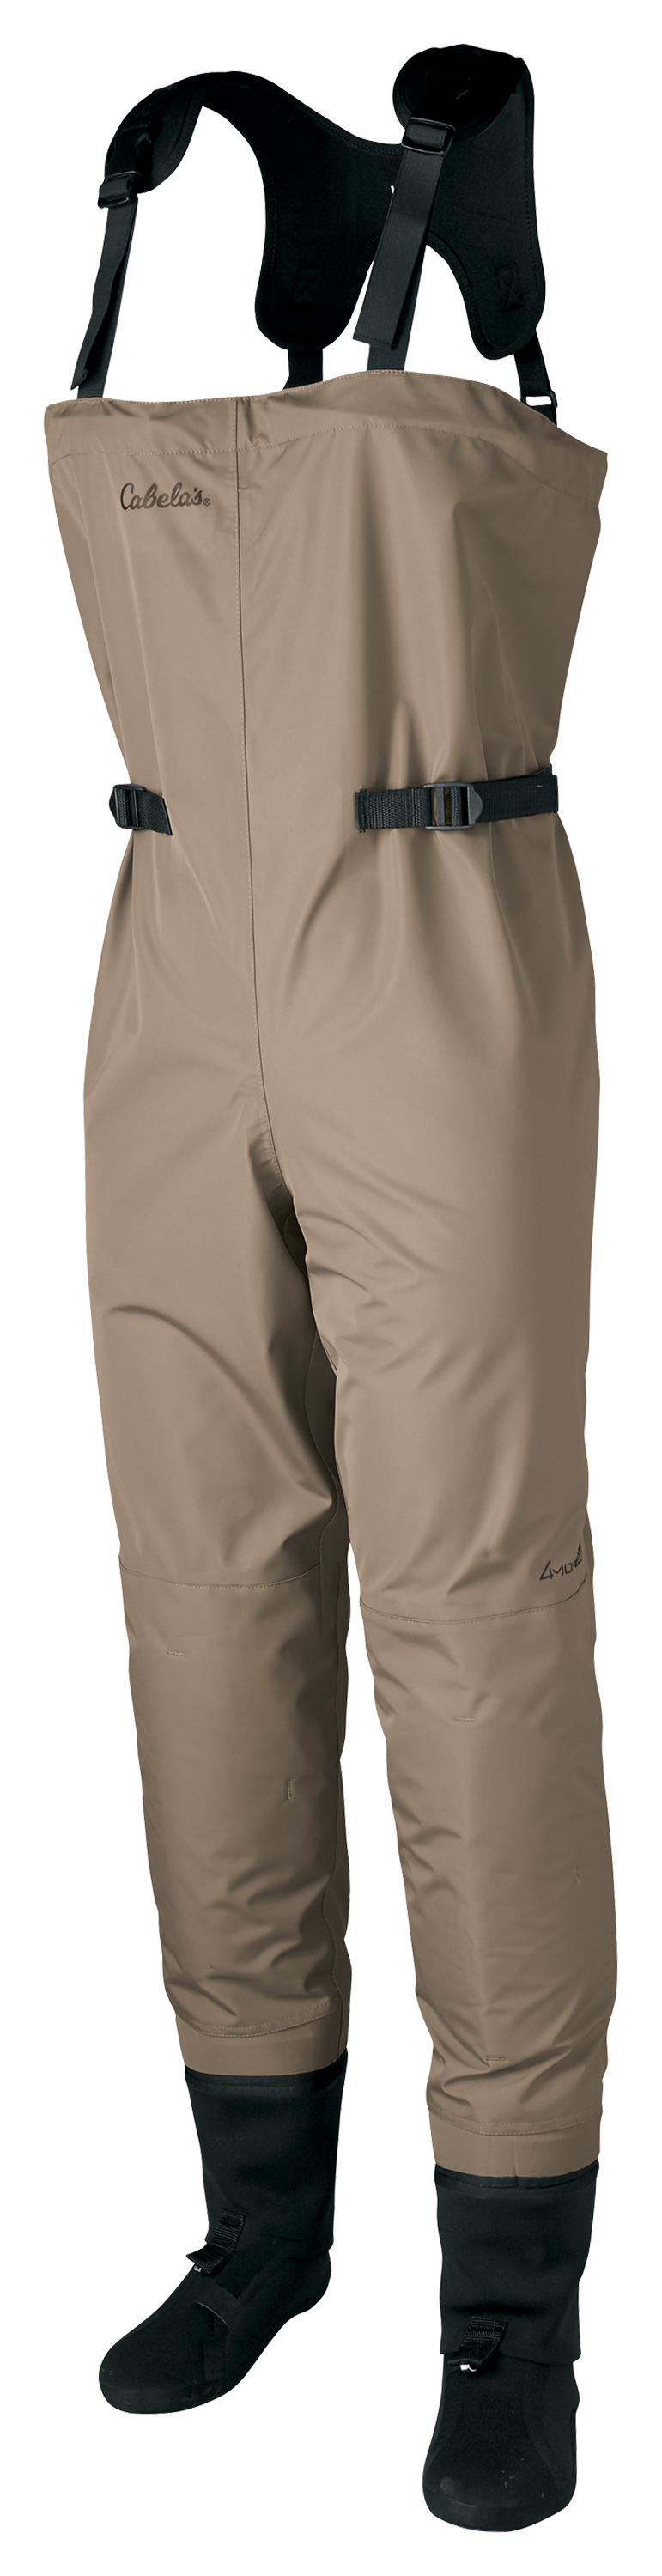 Cabela's Premium Breathable Stocking-Foot Fishing Waders for Ladies